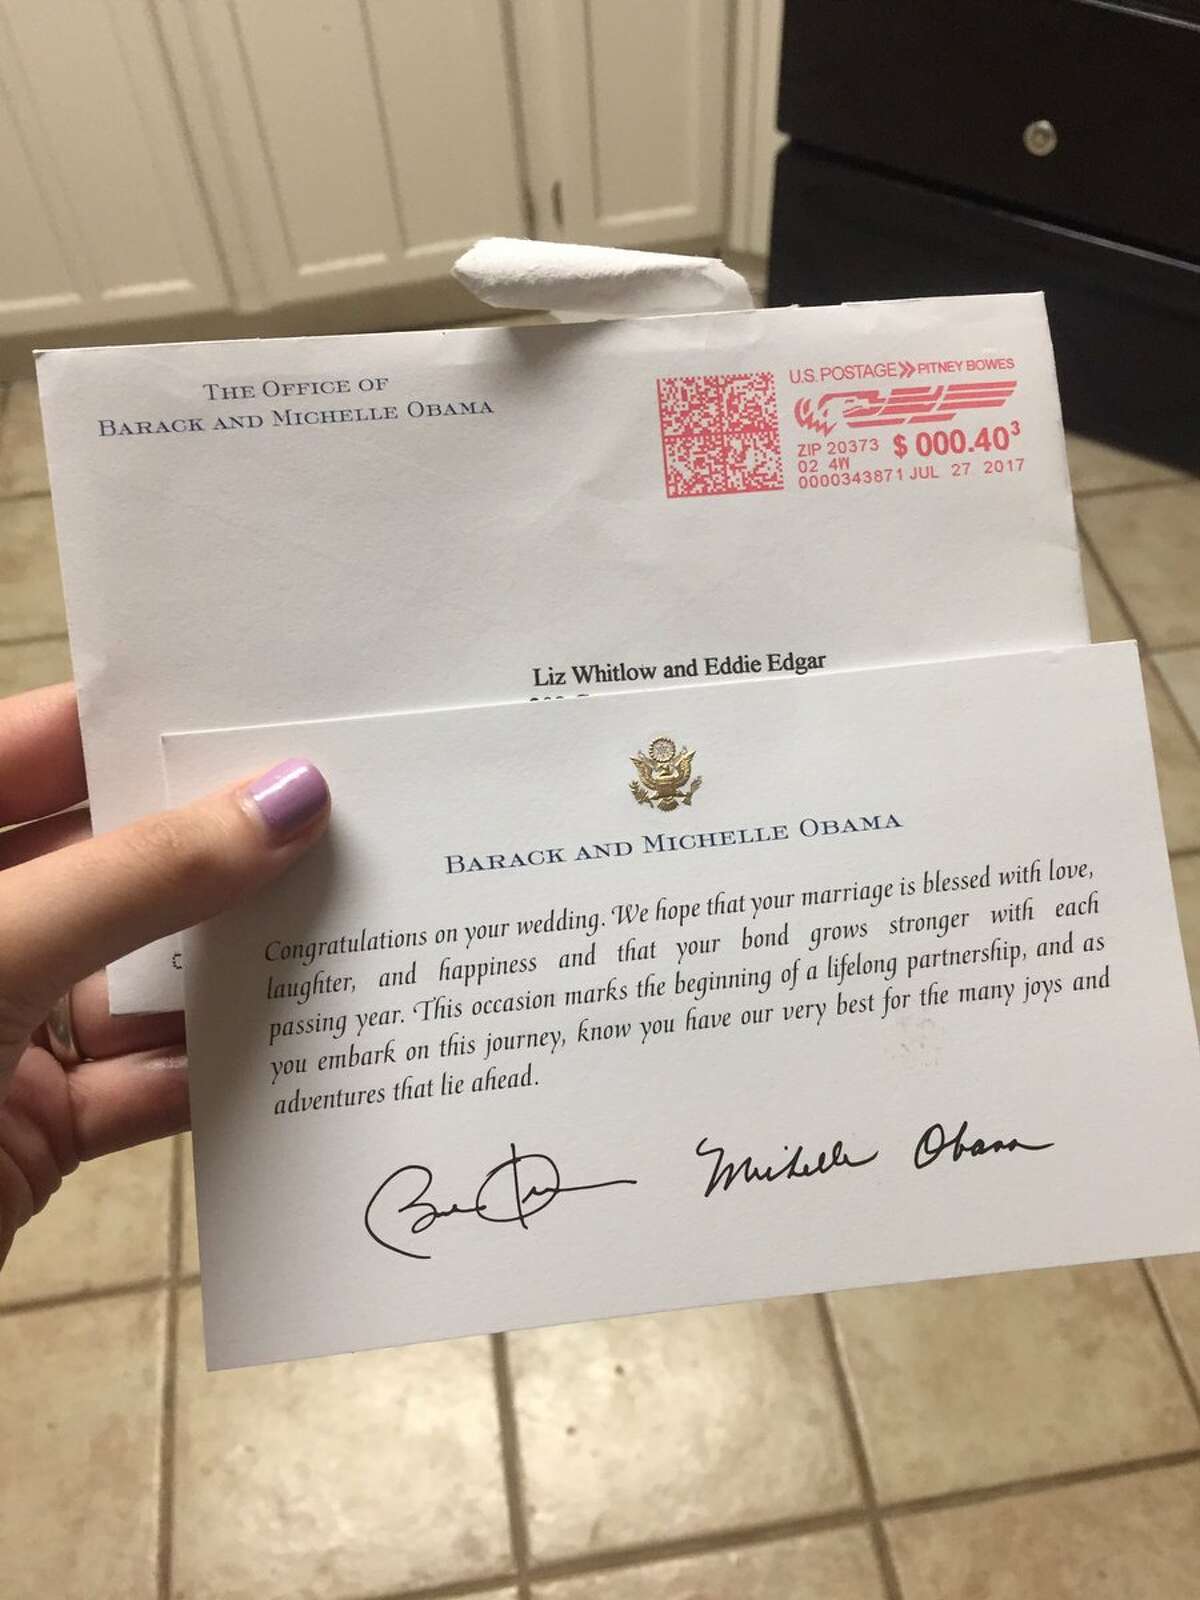 "MY MOM DEADASS SENT THE OBAMAS A WEDDING INVITATION BACK IN MARCH AND JUST RECEIVED THIS IN THE MAIL. IM HOLLERING," @96_brooke said in a viral tweet.